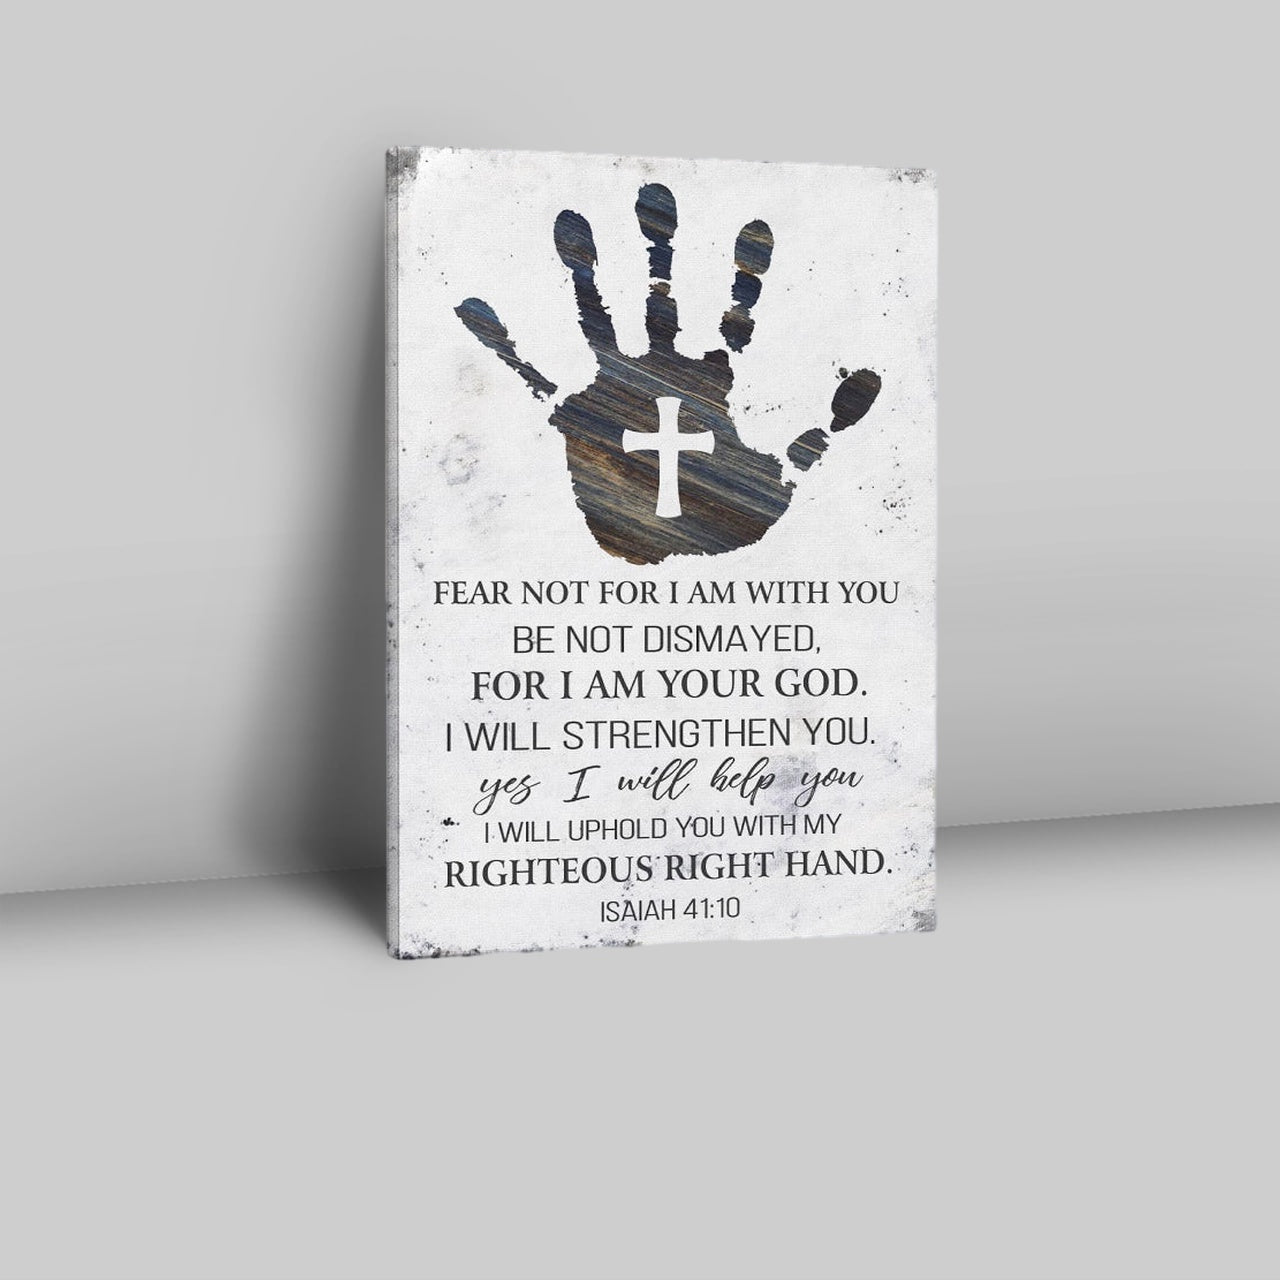 Isaiah 4110 Wall Art Fear Not For I Am With You Canvas Wall Art - Bible Verse Wall Decor - Scripture Wall Decor